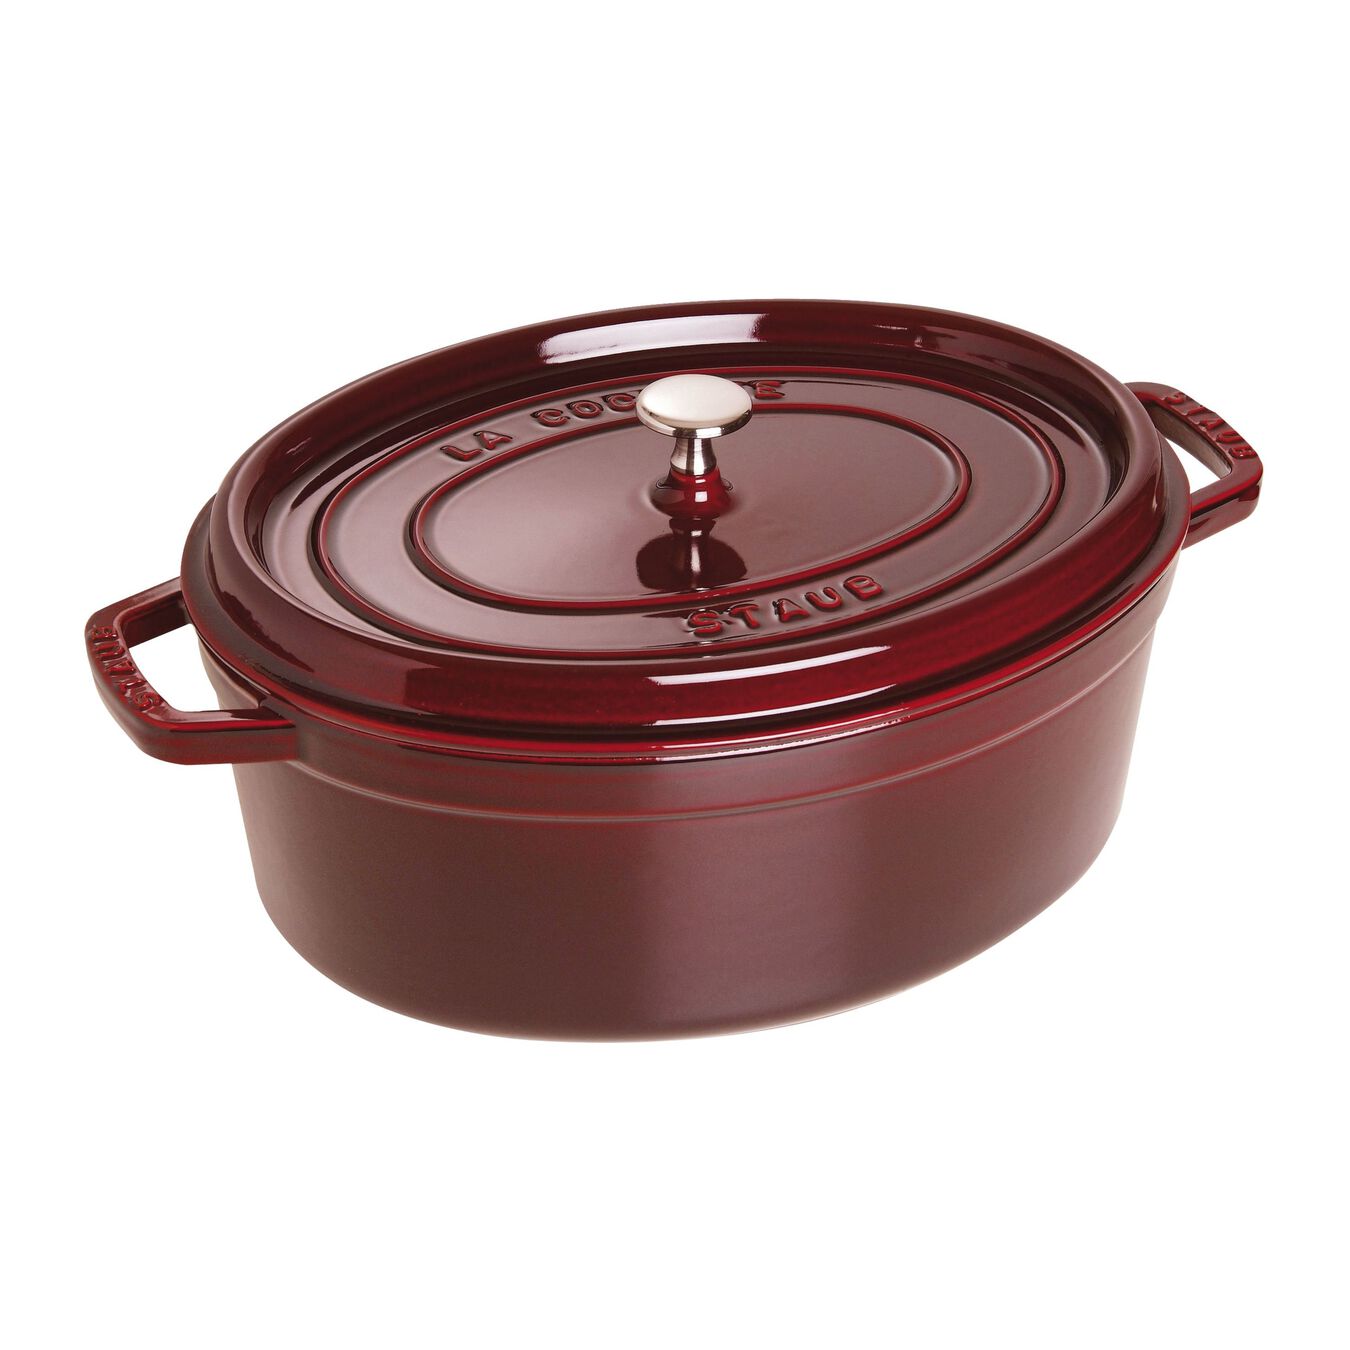 Cocotte 33 cm, oval, Grenadine-Rot, Gusseisen,,large 1